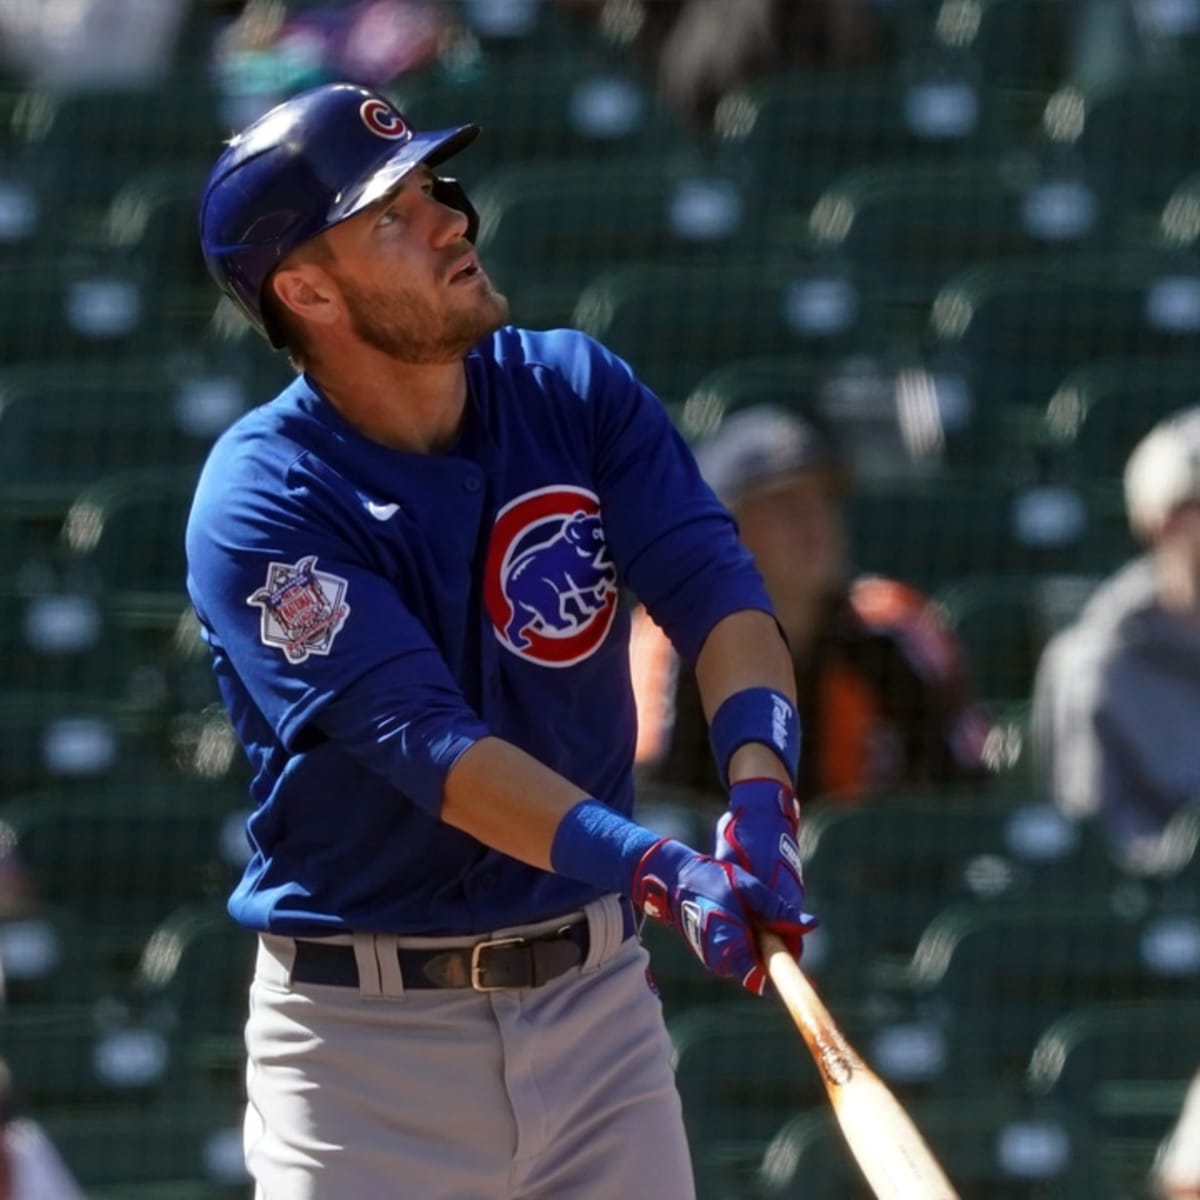 Chicago Cubs News: Patrick Wisdom named Player of the Week